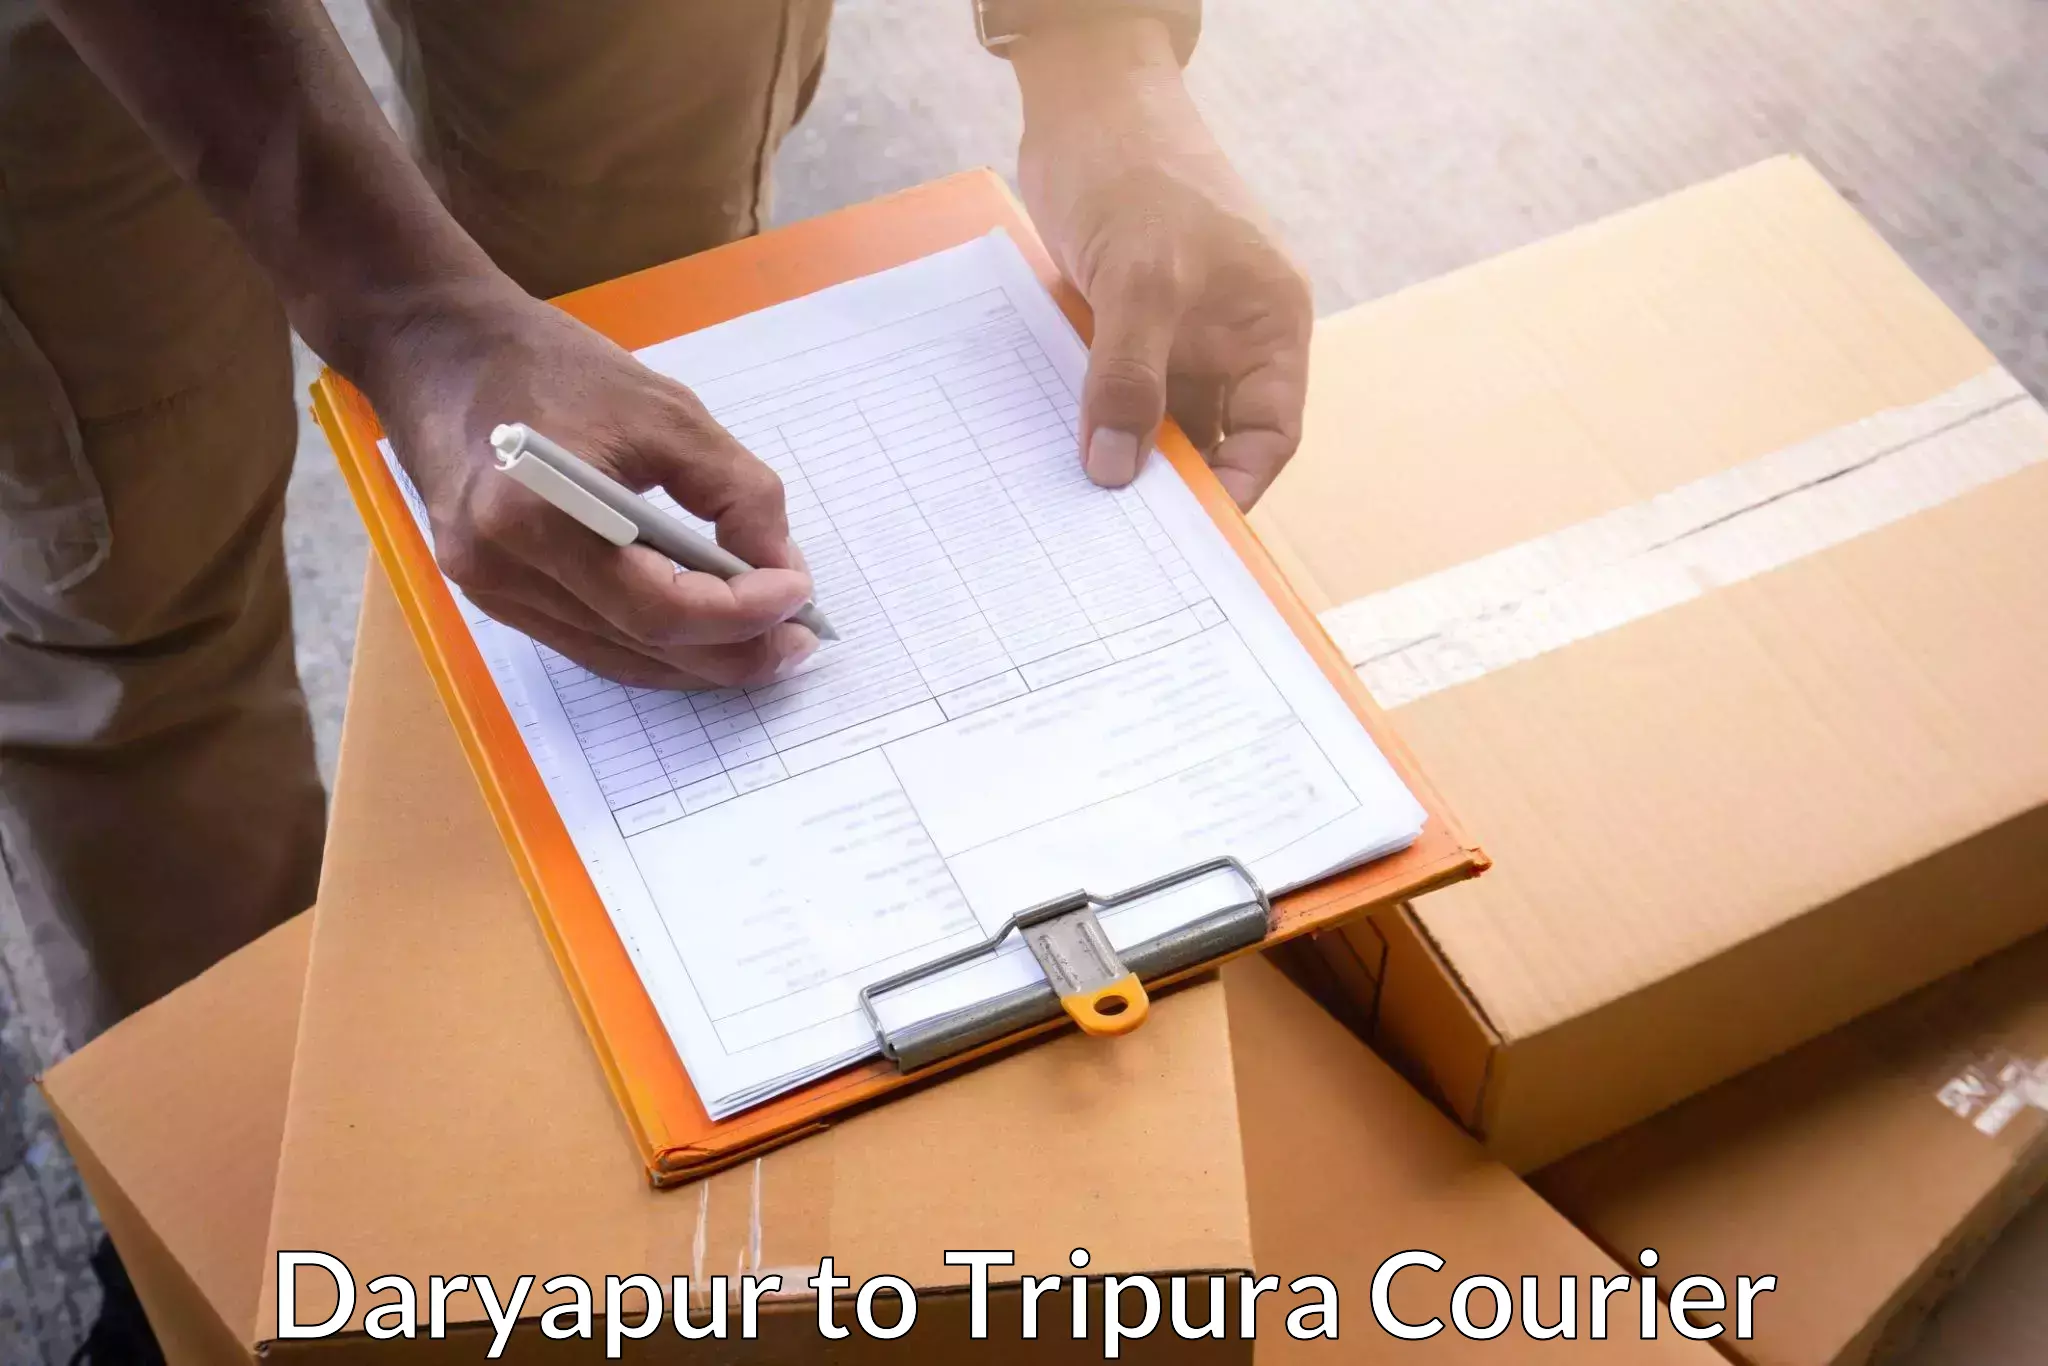 Fast delivery service Daryapur to Udaipur Tripura